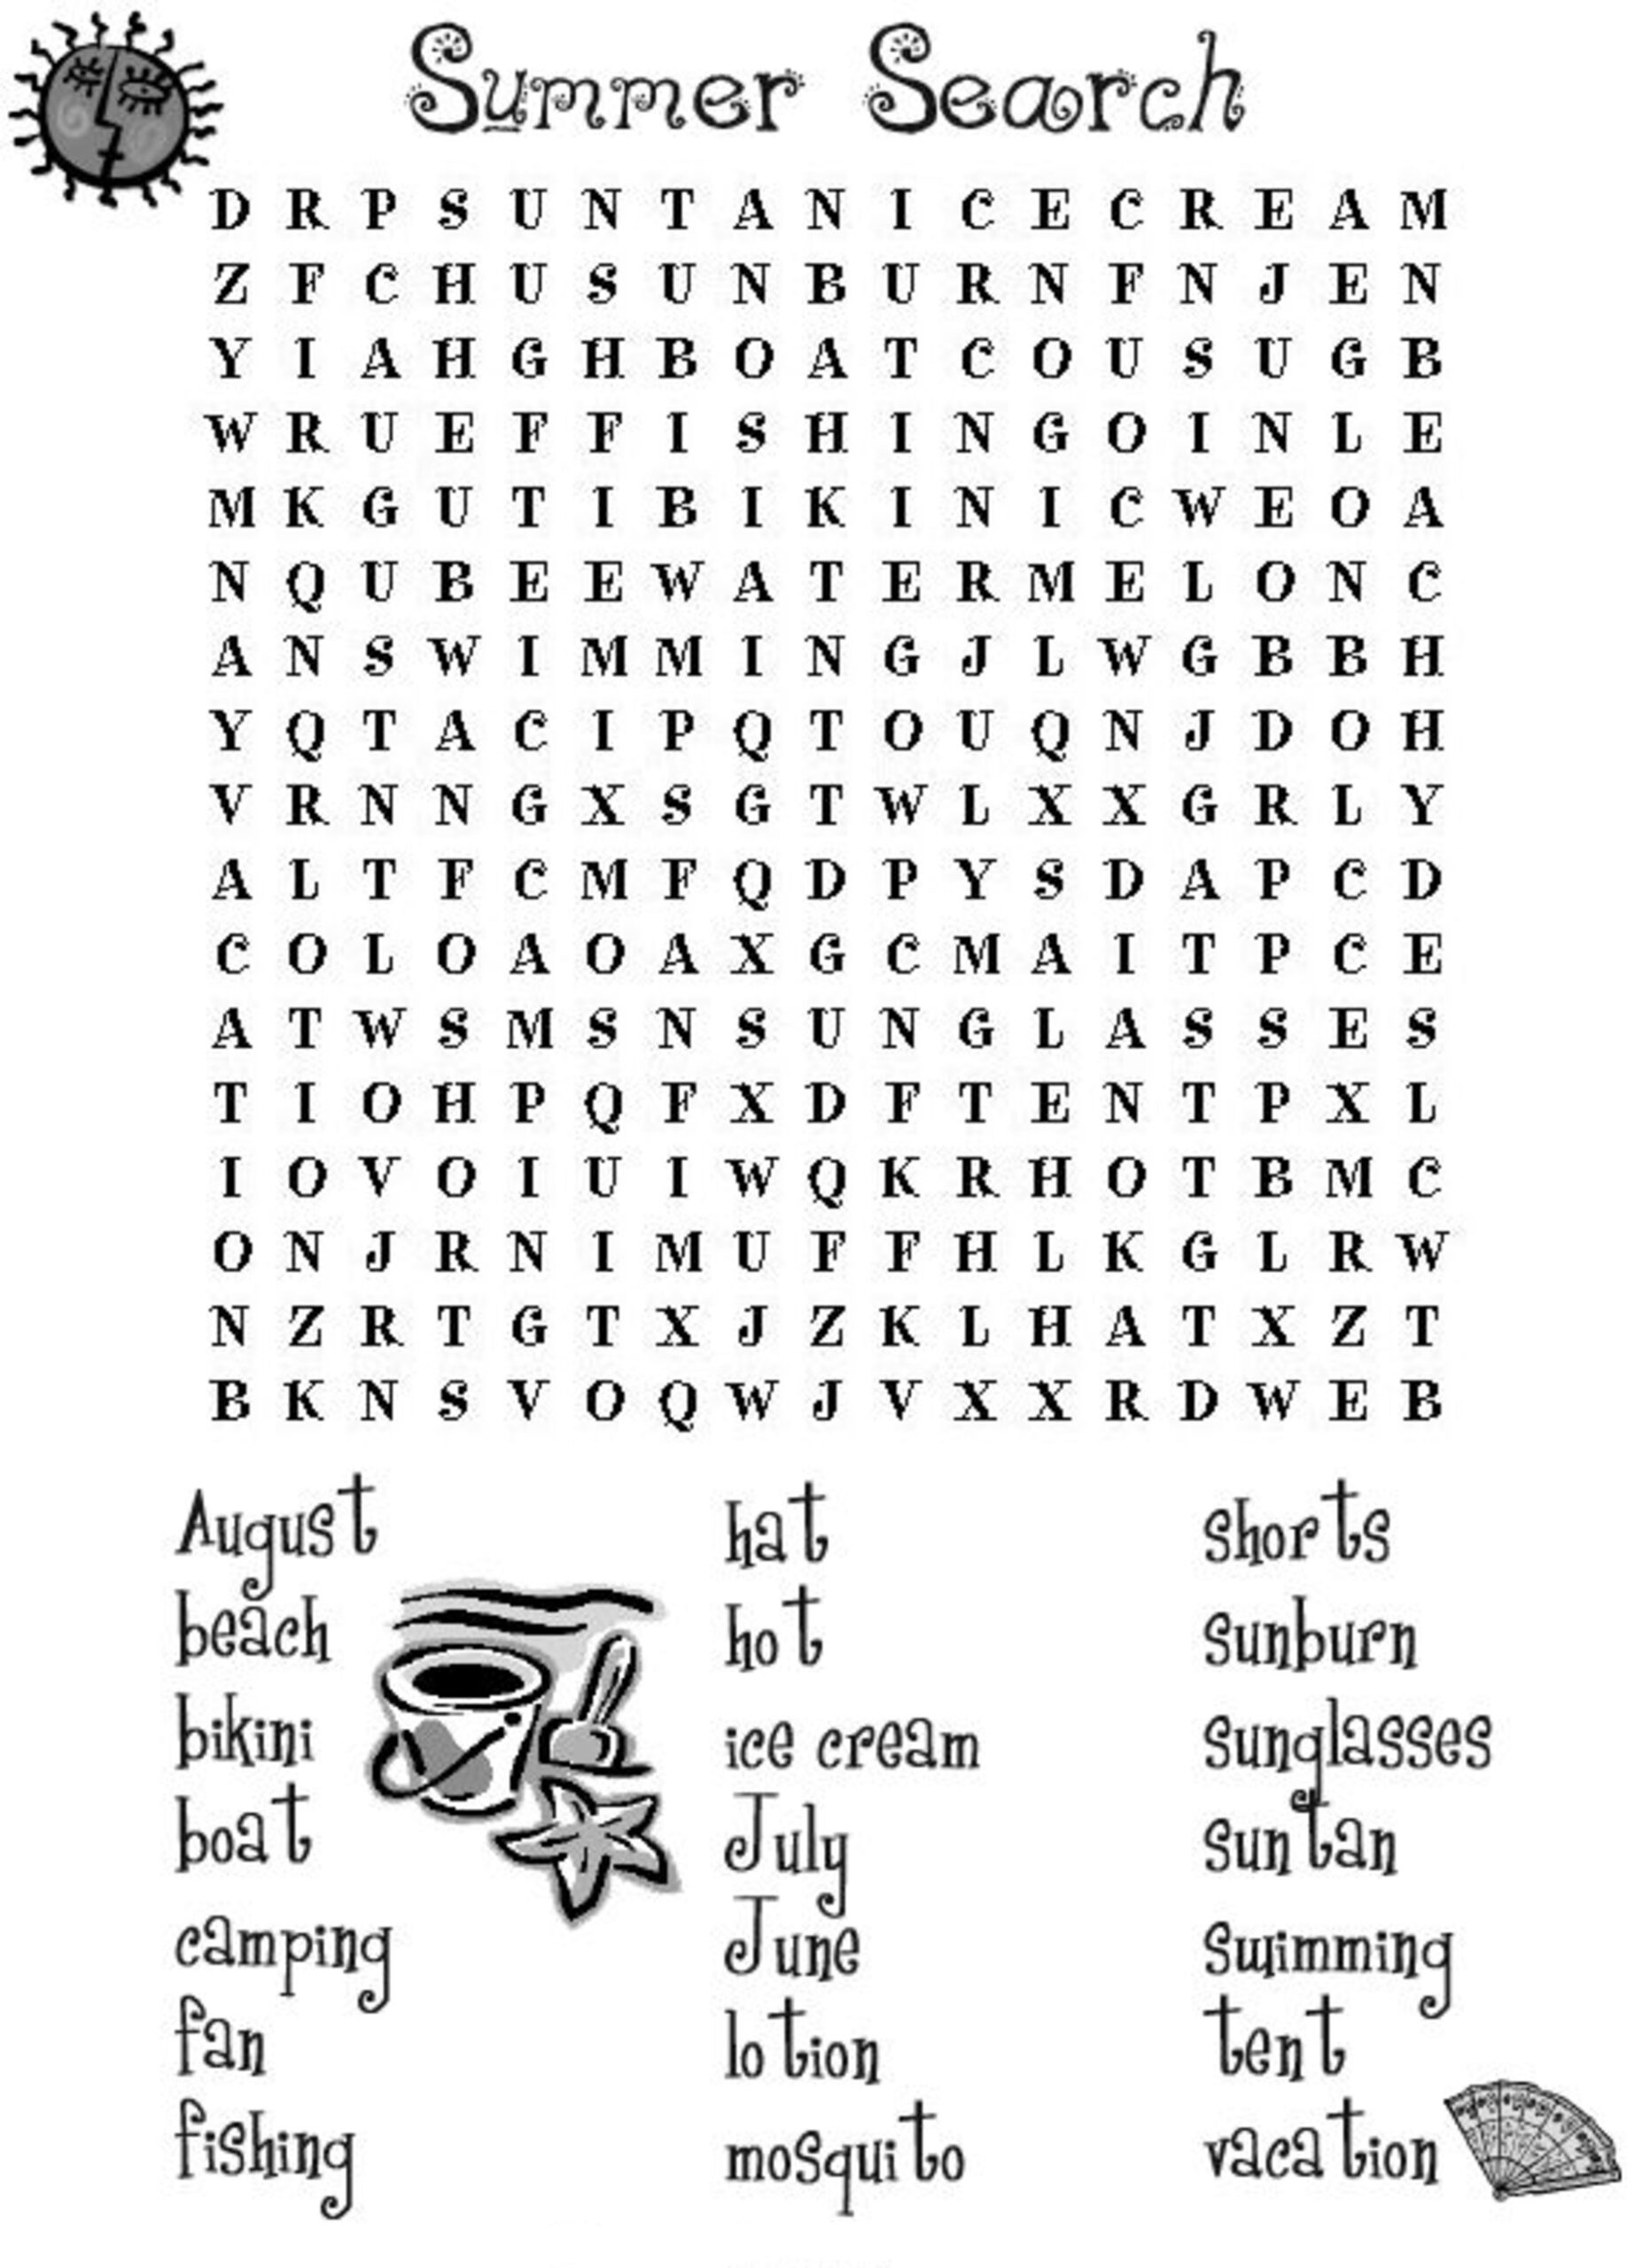 June Word Search Free Printable